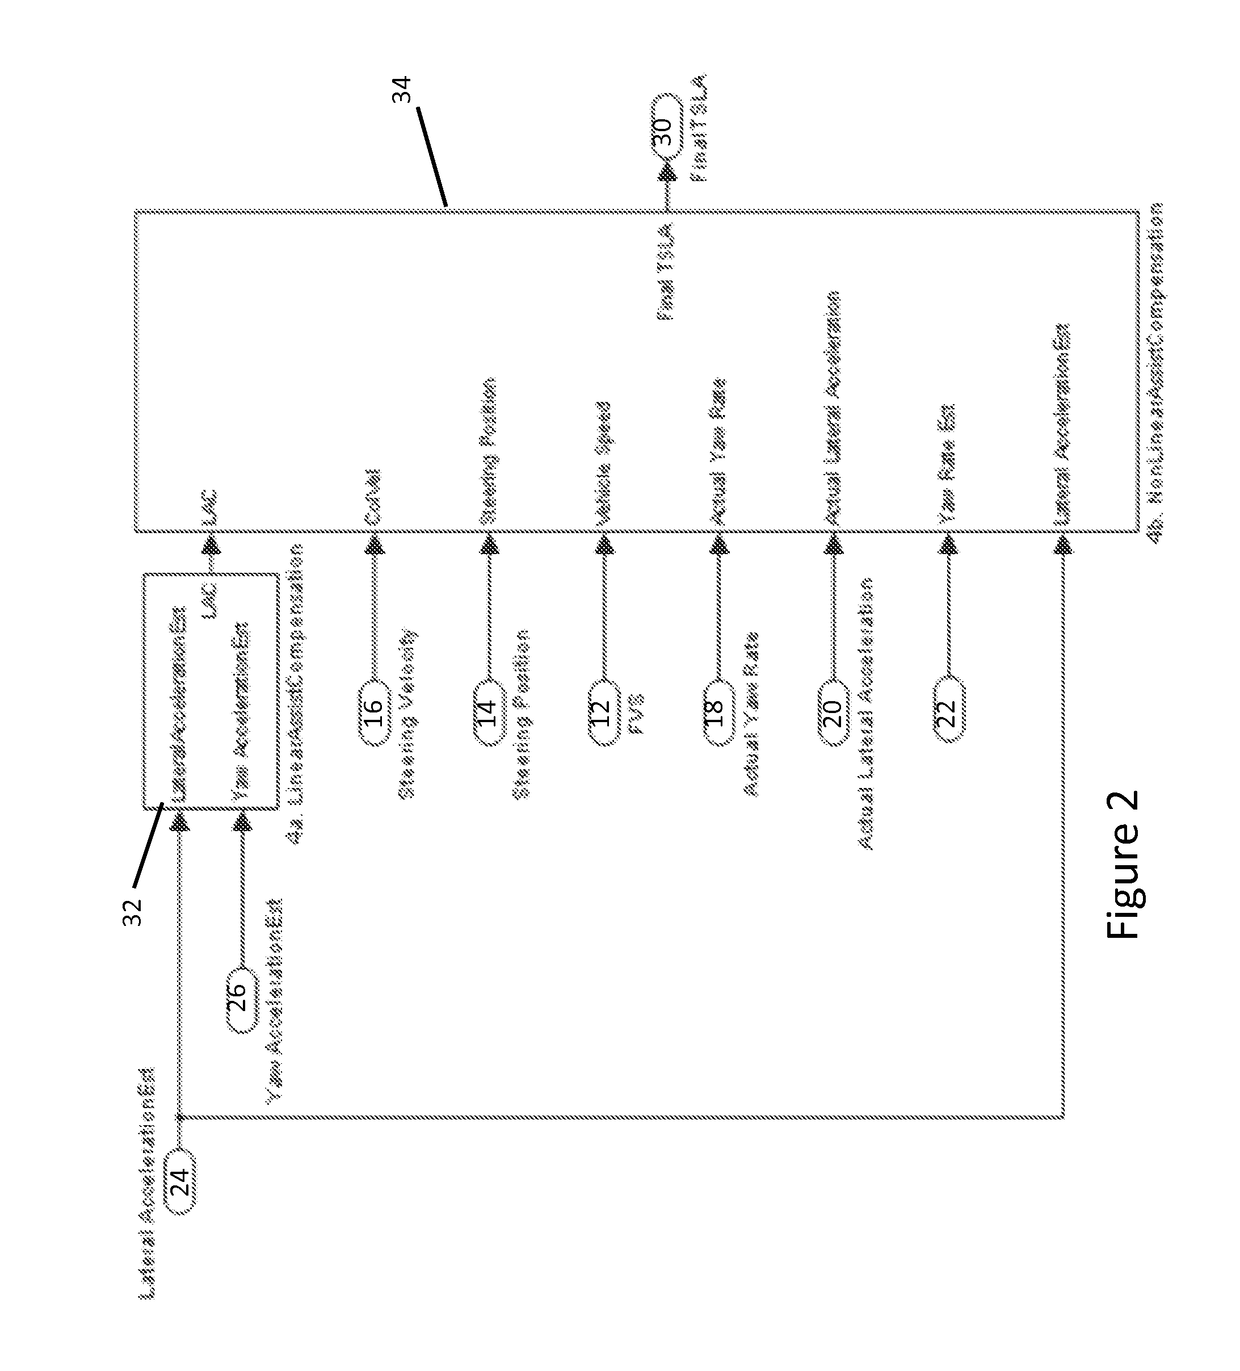 Assist Compensation For Actively Controlled Power Steering Systems